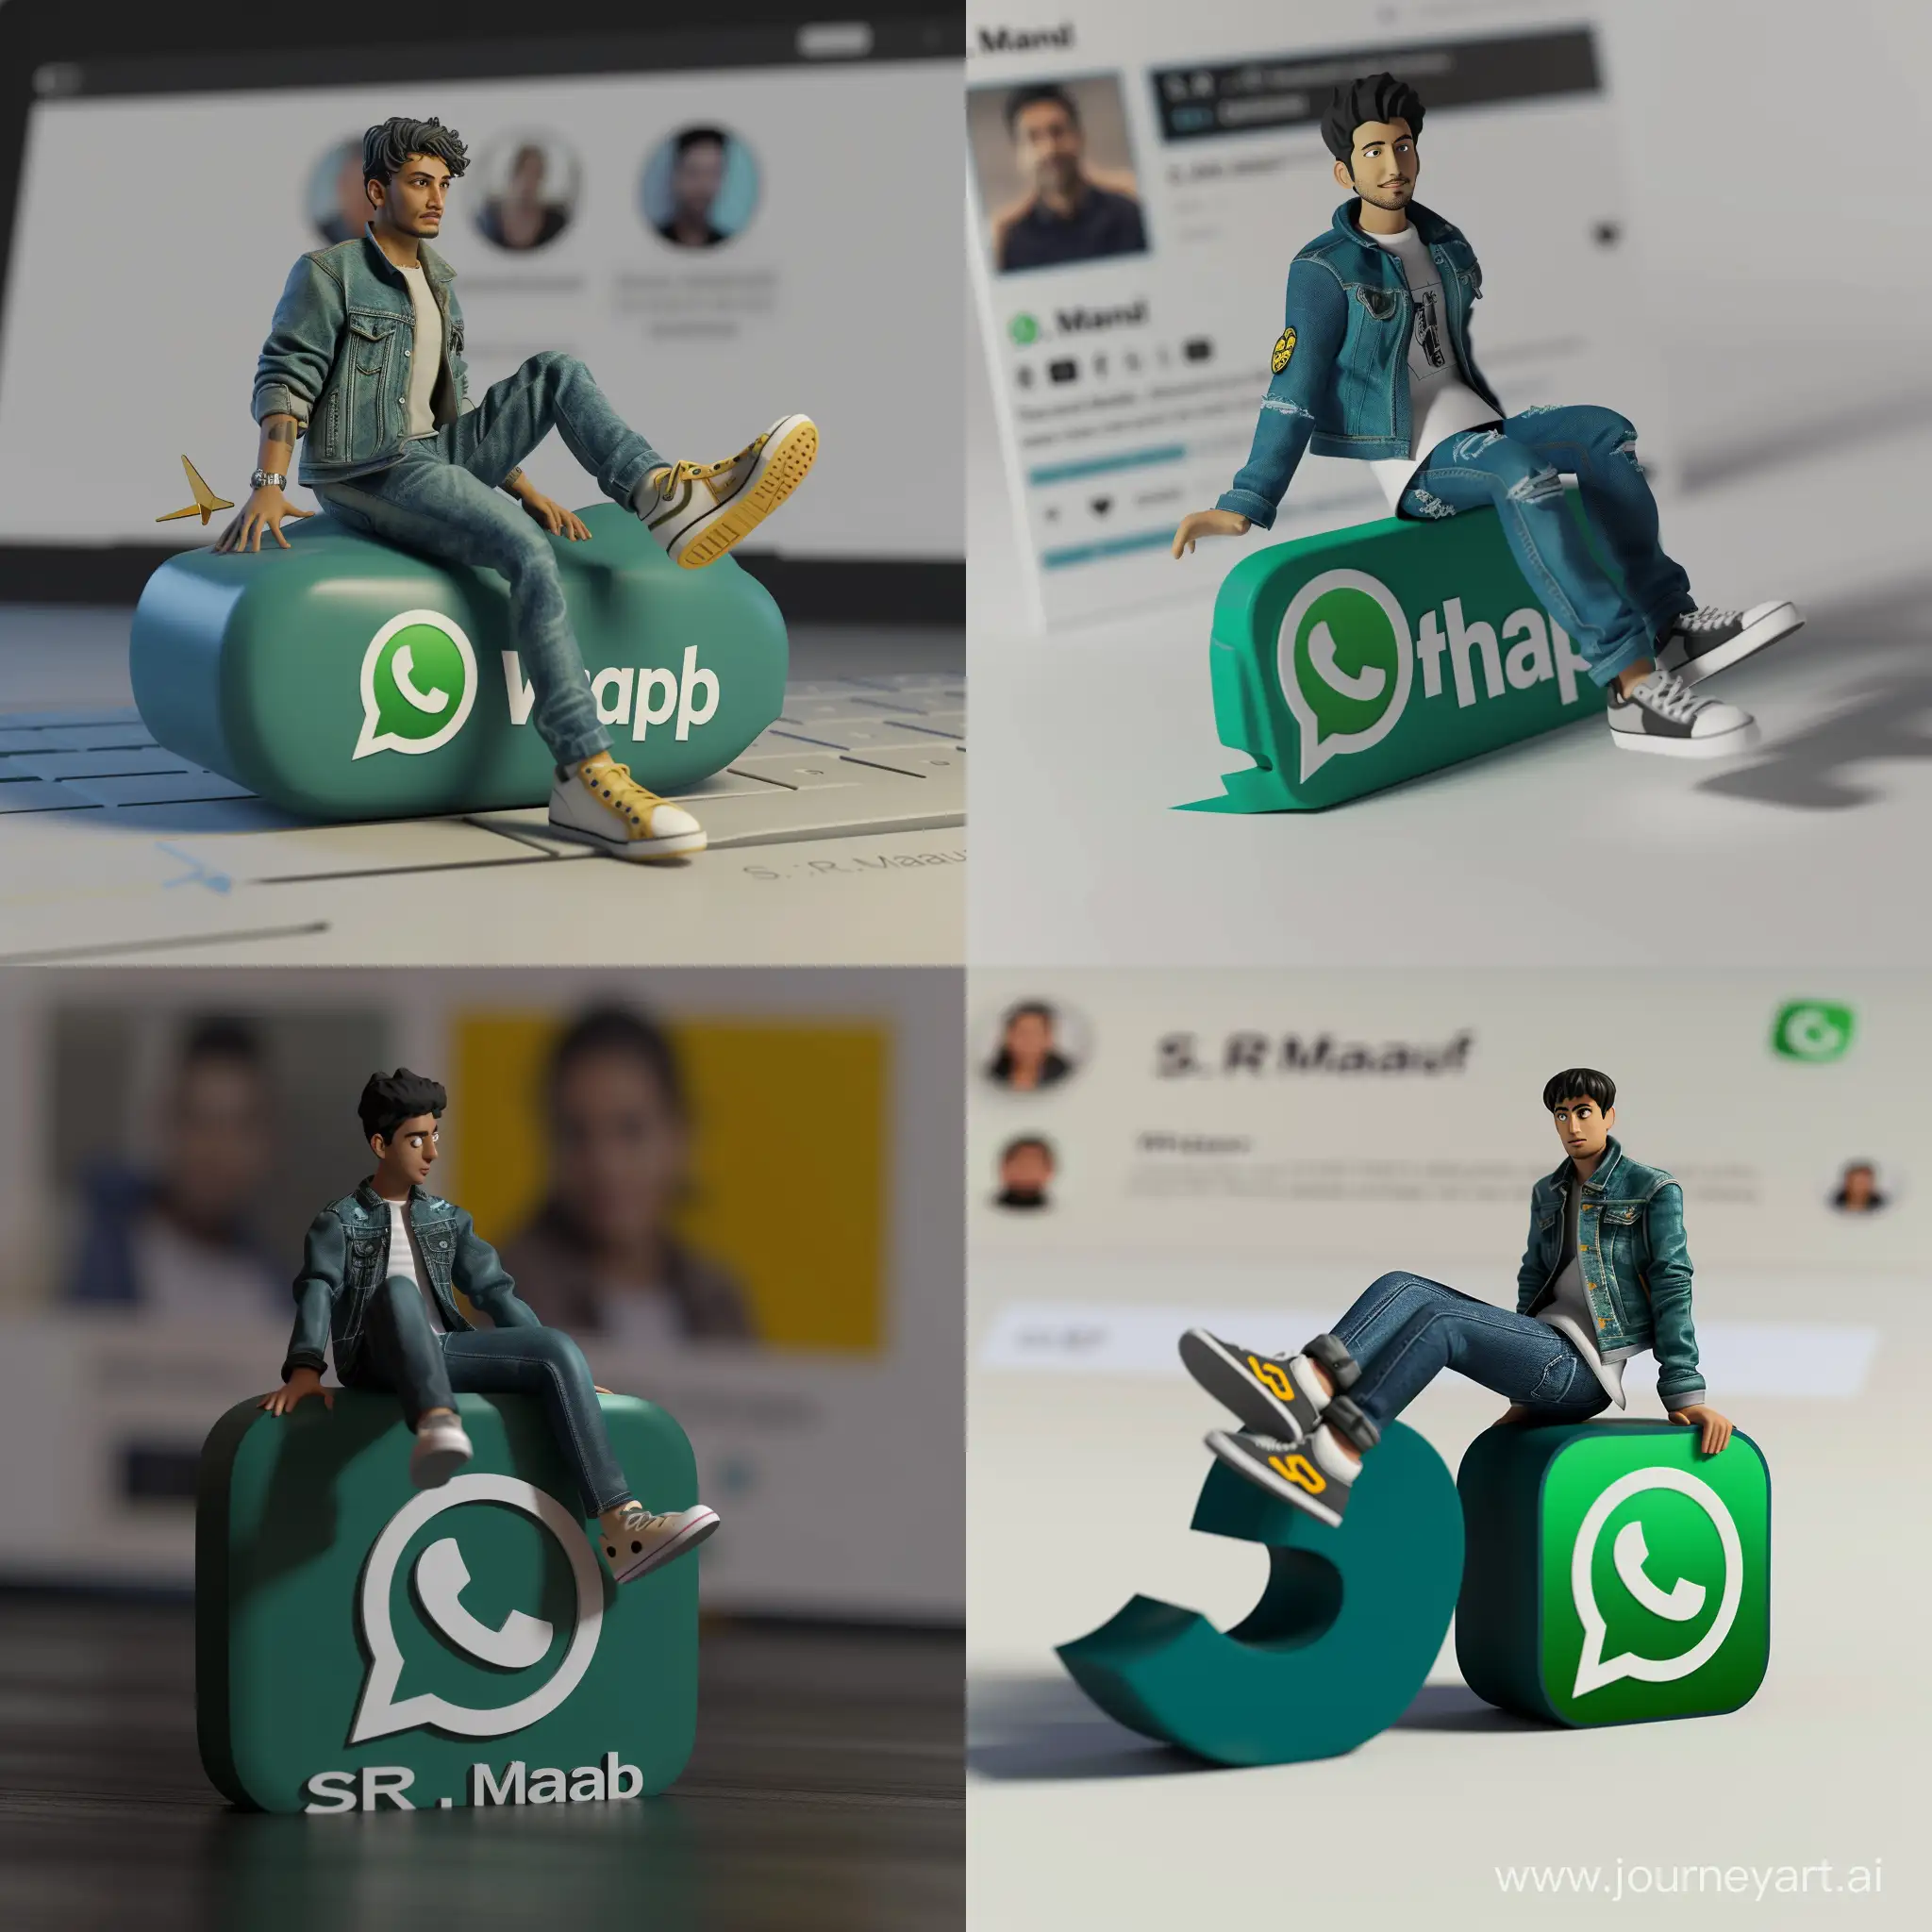 Create a 3D illustration of an animated character sitting casually on top of a social media logo "WhatsApp". The character must wear casual modern clothing such as jeans jacket and sneakers shoes. The background of the image is a social media profile page with a user name "S.R.Maruf" and a profile picture that match.